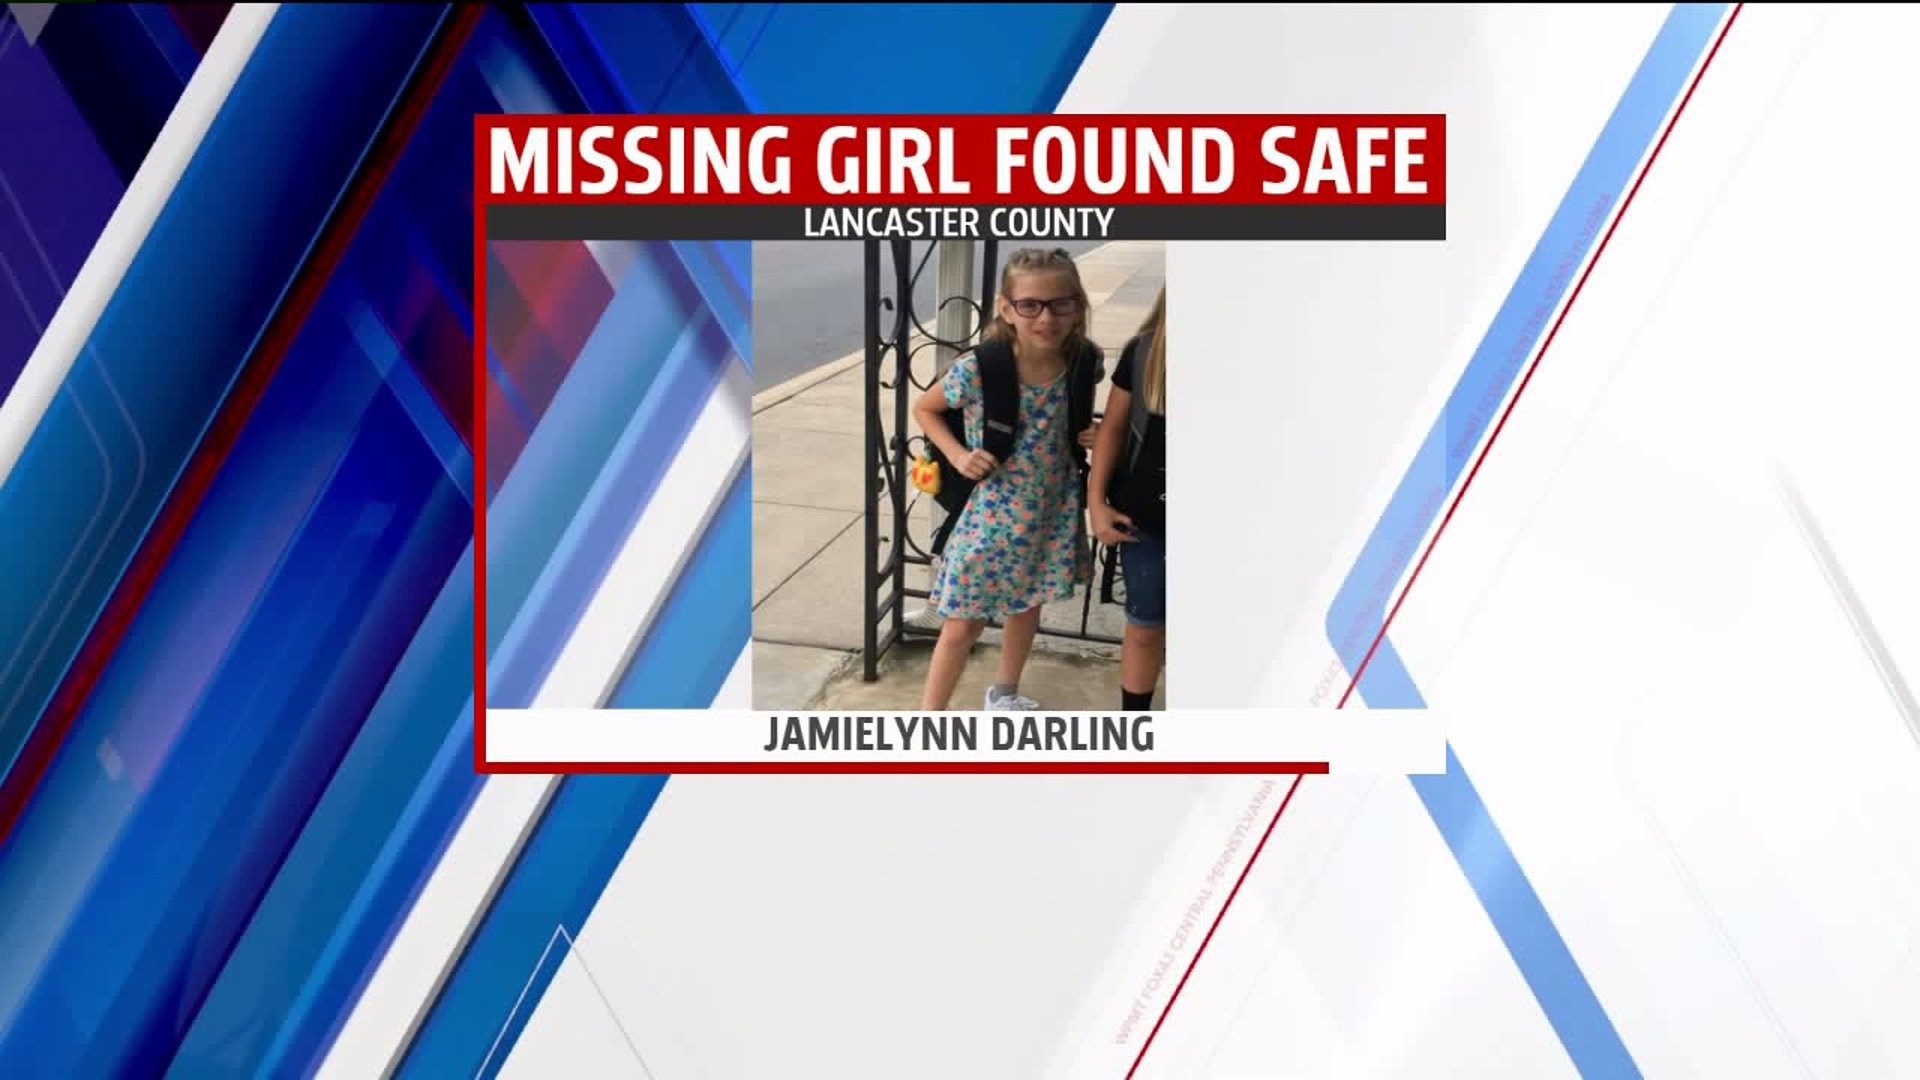 10-year-old Lancaster County girl found safely